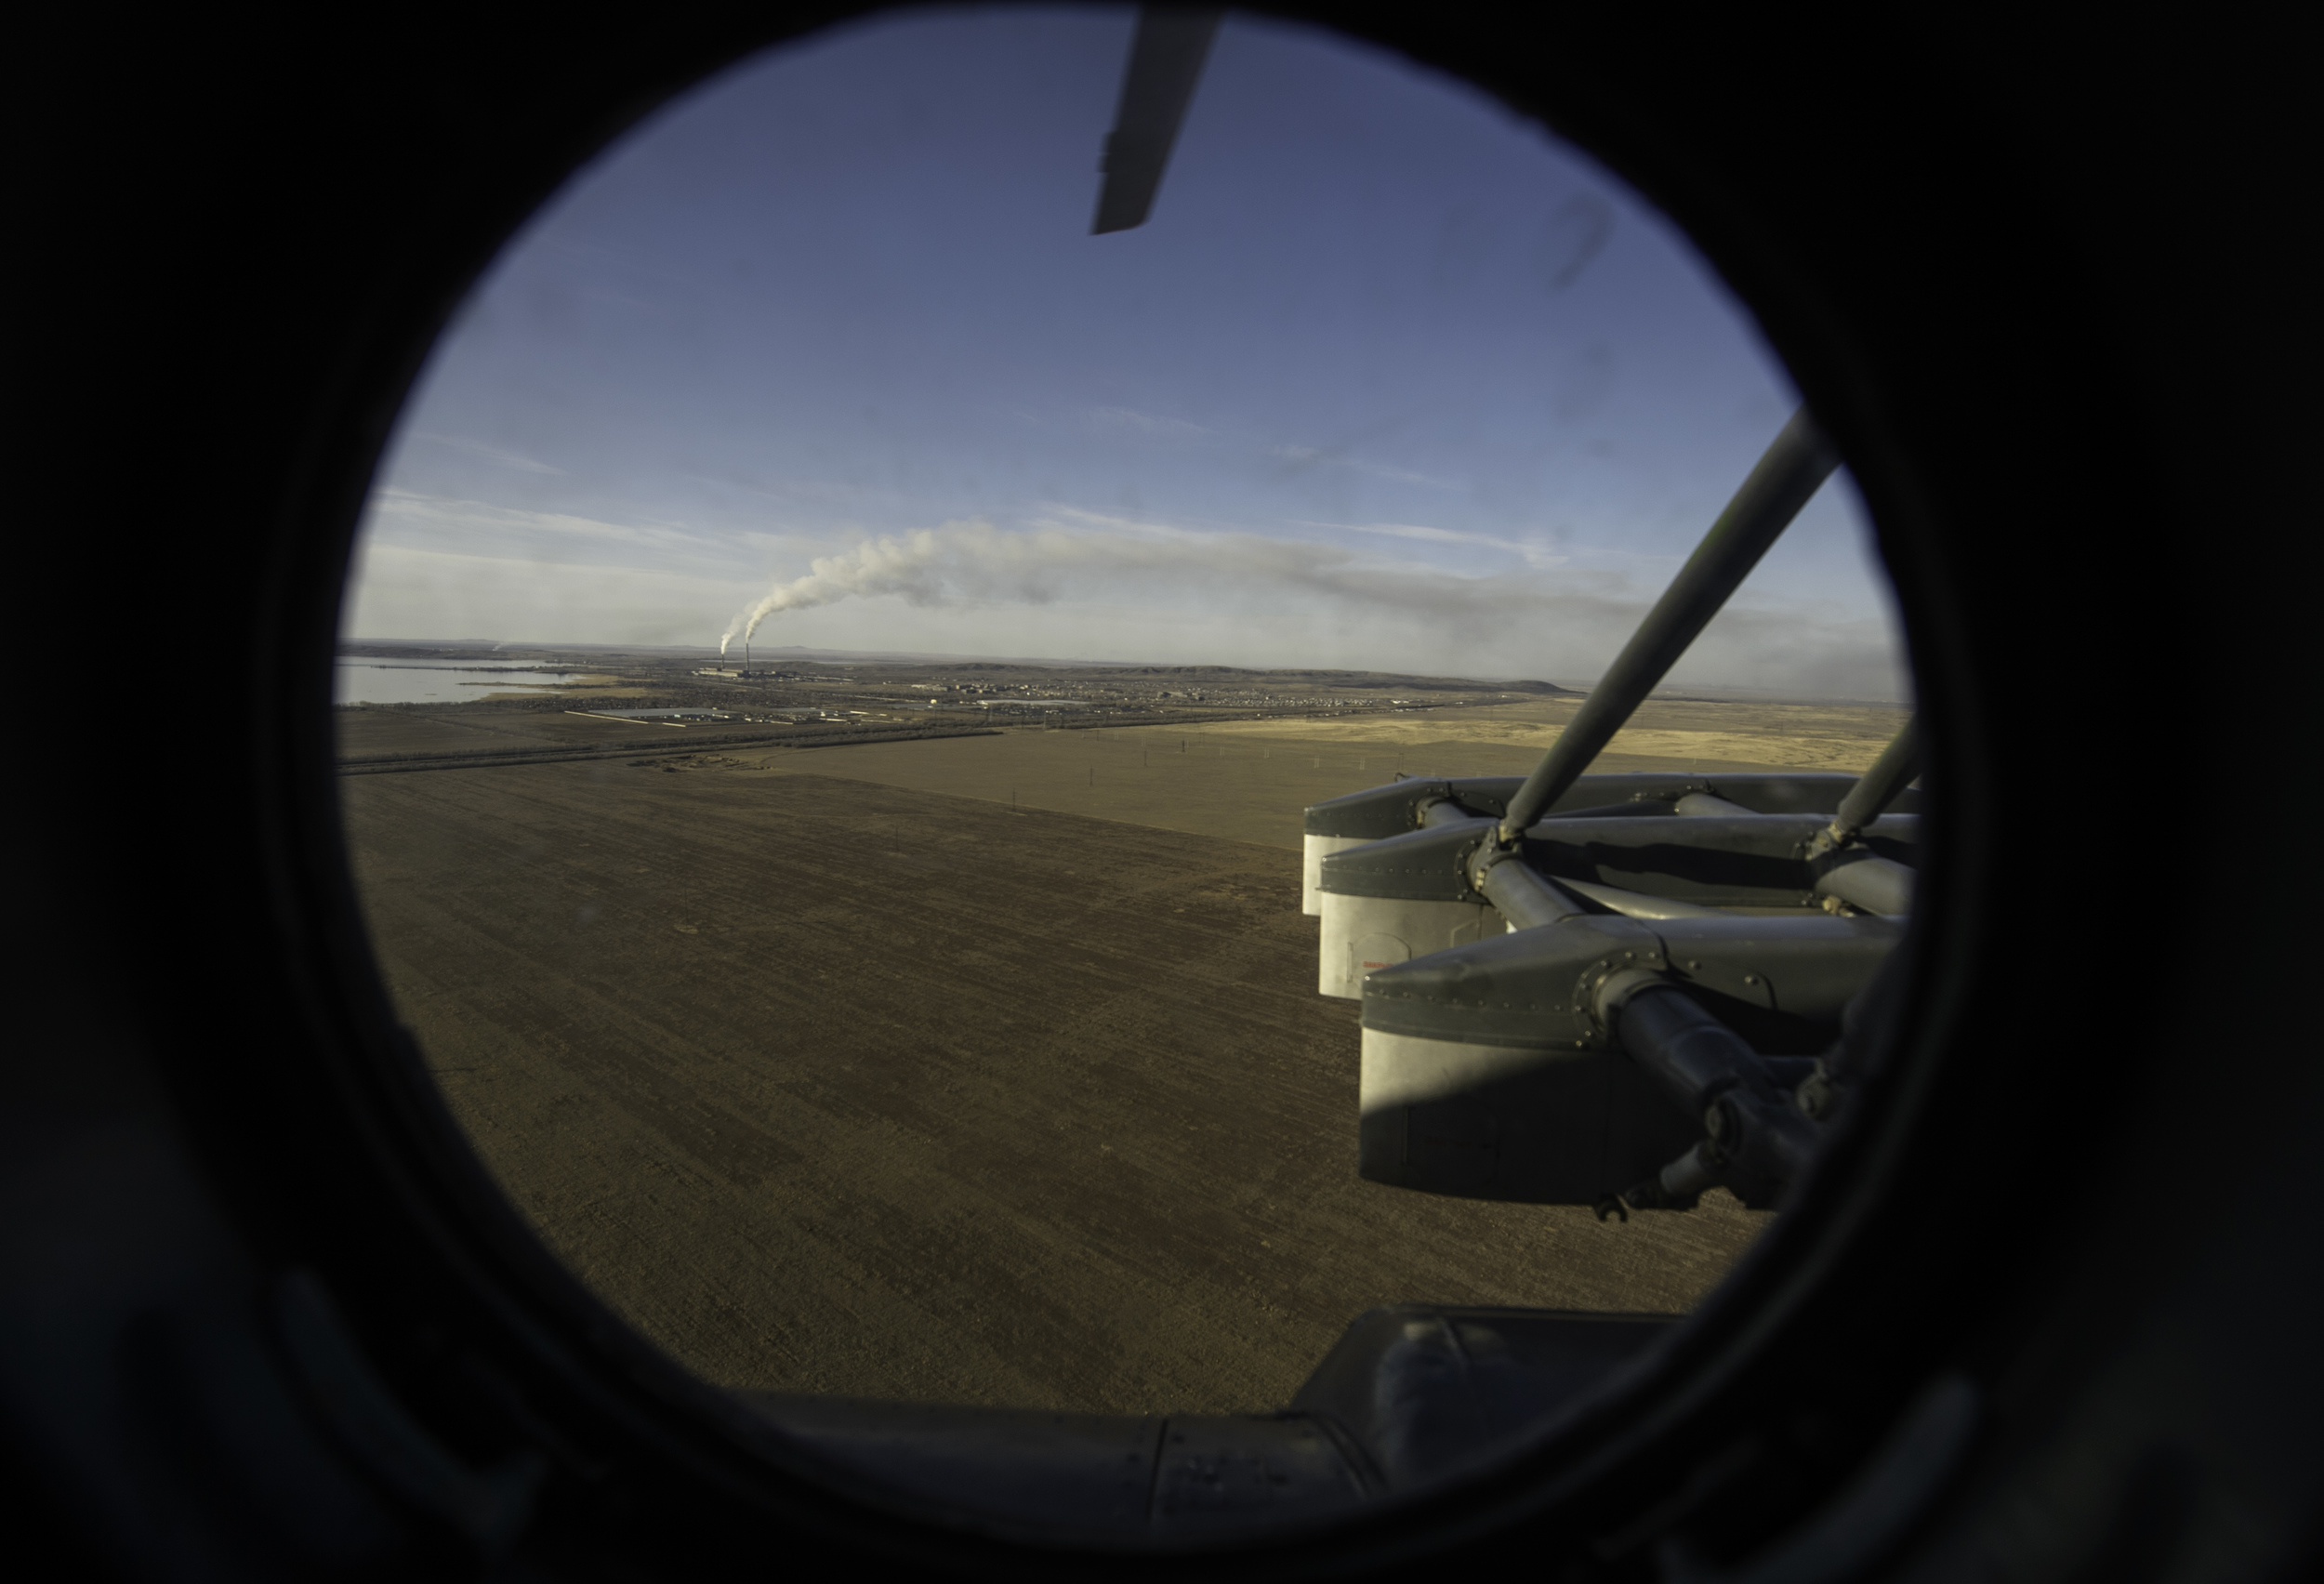  A view of the Kazakh steppe from the window of a Russian search and rescue helicopter en route to Zhezkazgan airport in Kazakhstan, Sunday, Nov. 10, 2013, a day ahead of the scheduled landing of the Soyuz TMA-09M spacecraft with Expedition 37 Comman